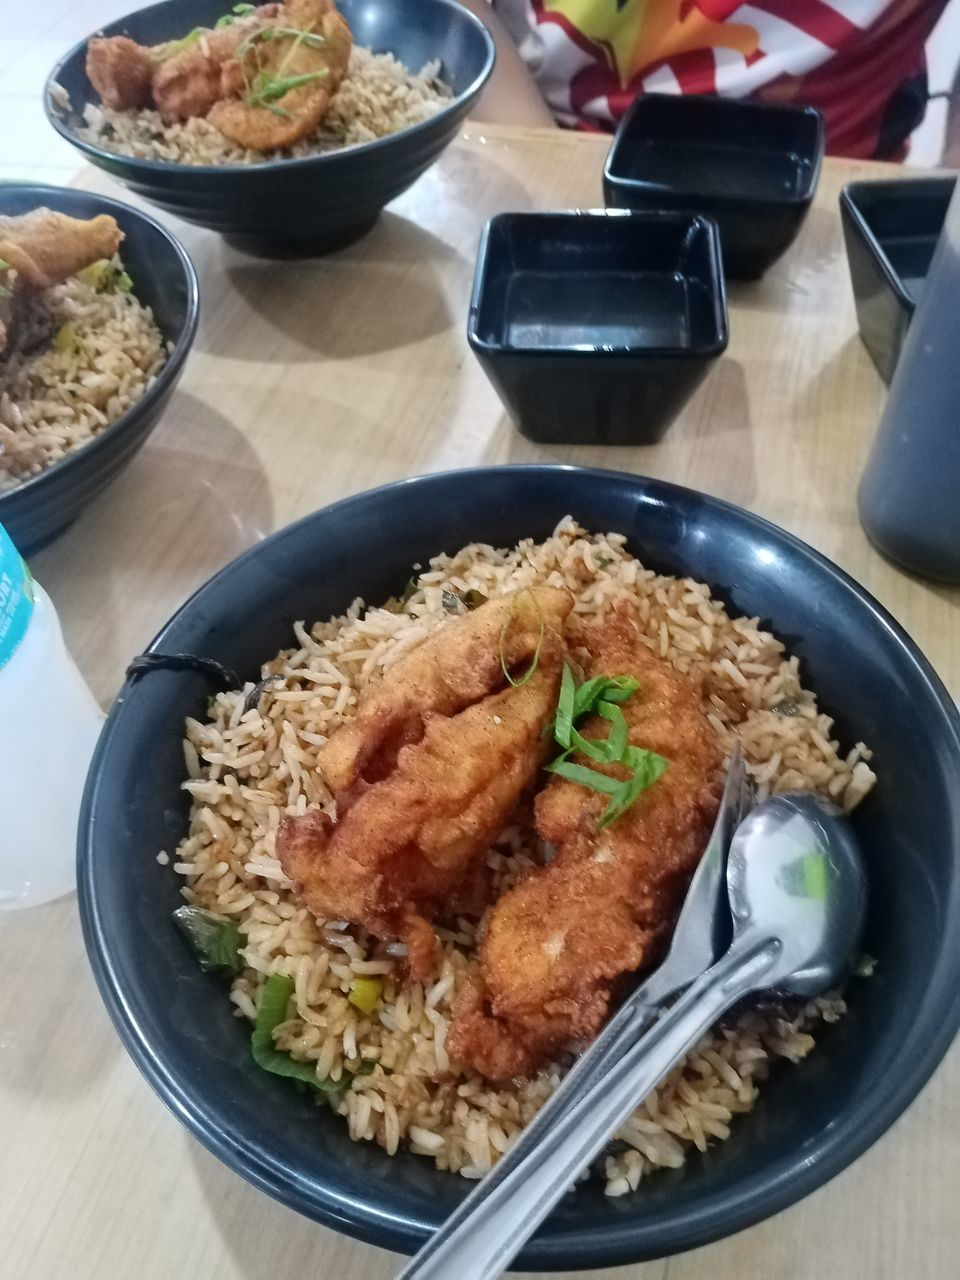 food and drink, food, table, lunch, healthy eating, freshness, plate, dish, meat, high angle view, wellbeing, meal, indoors, cuisine, asian food, no people, rice - food staple, bowl, vegetable, chinese food, serving size, kitchen utensil, eating utensil, still life, pasta, fried rice, seafood, fried